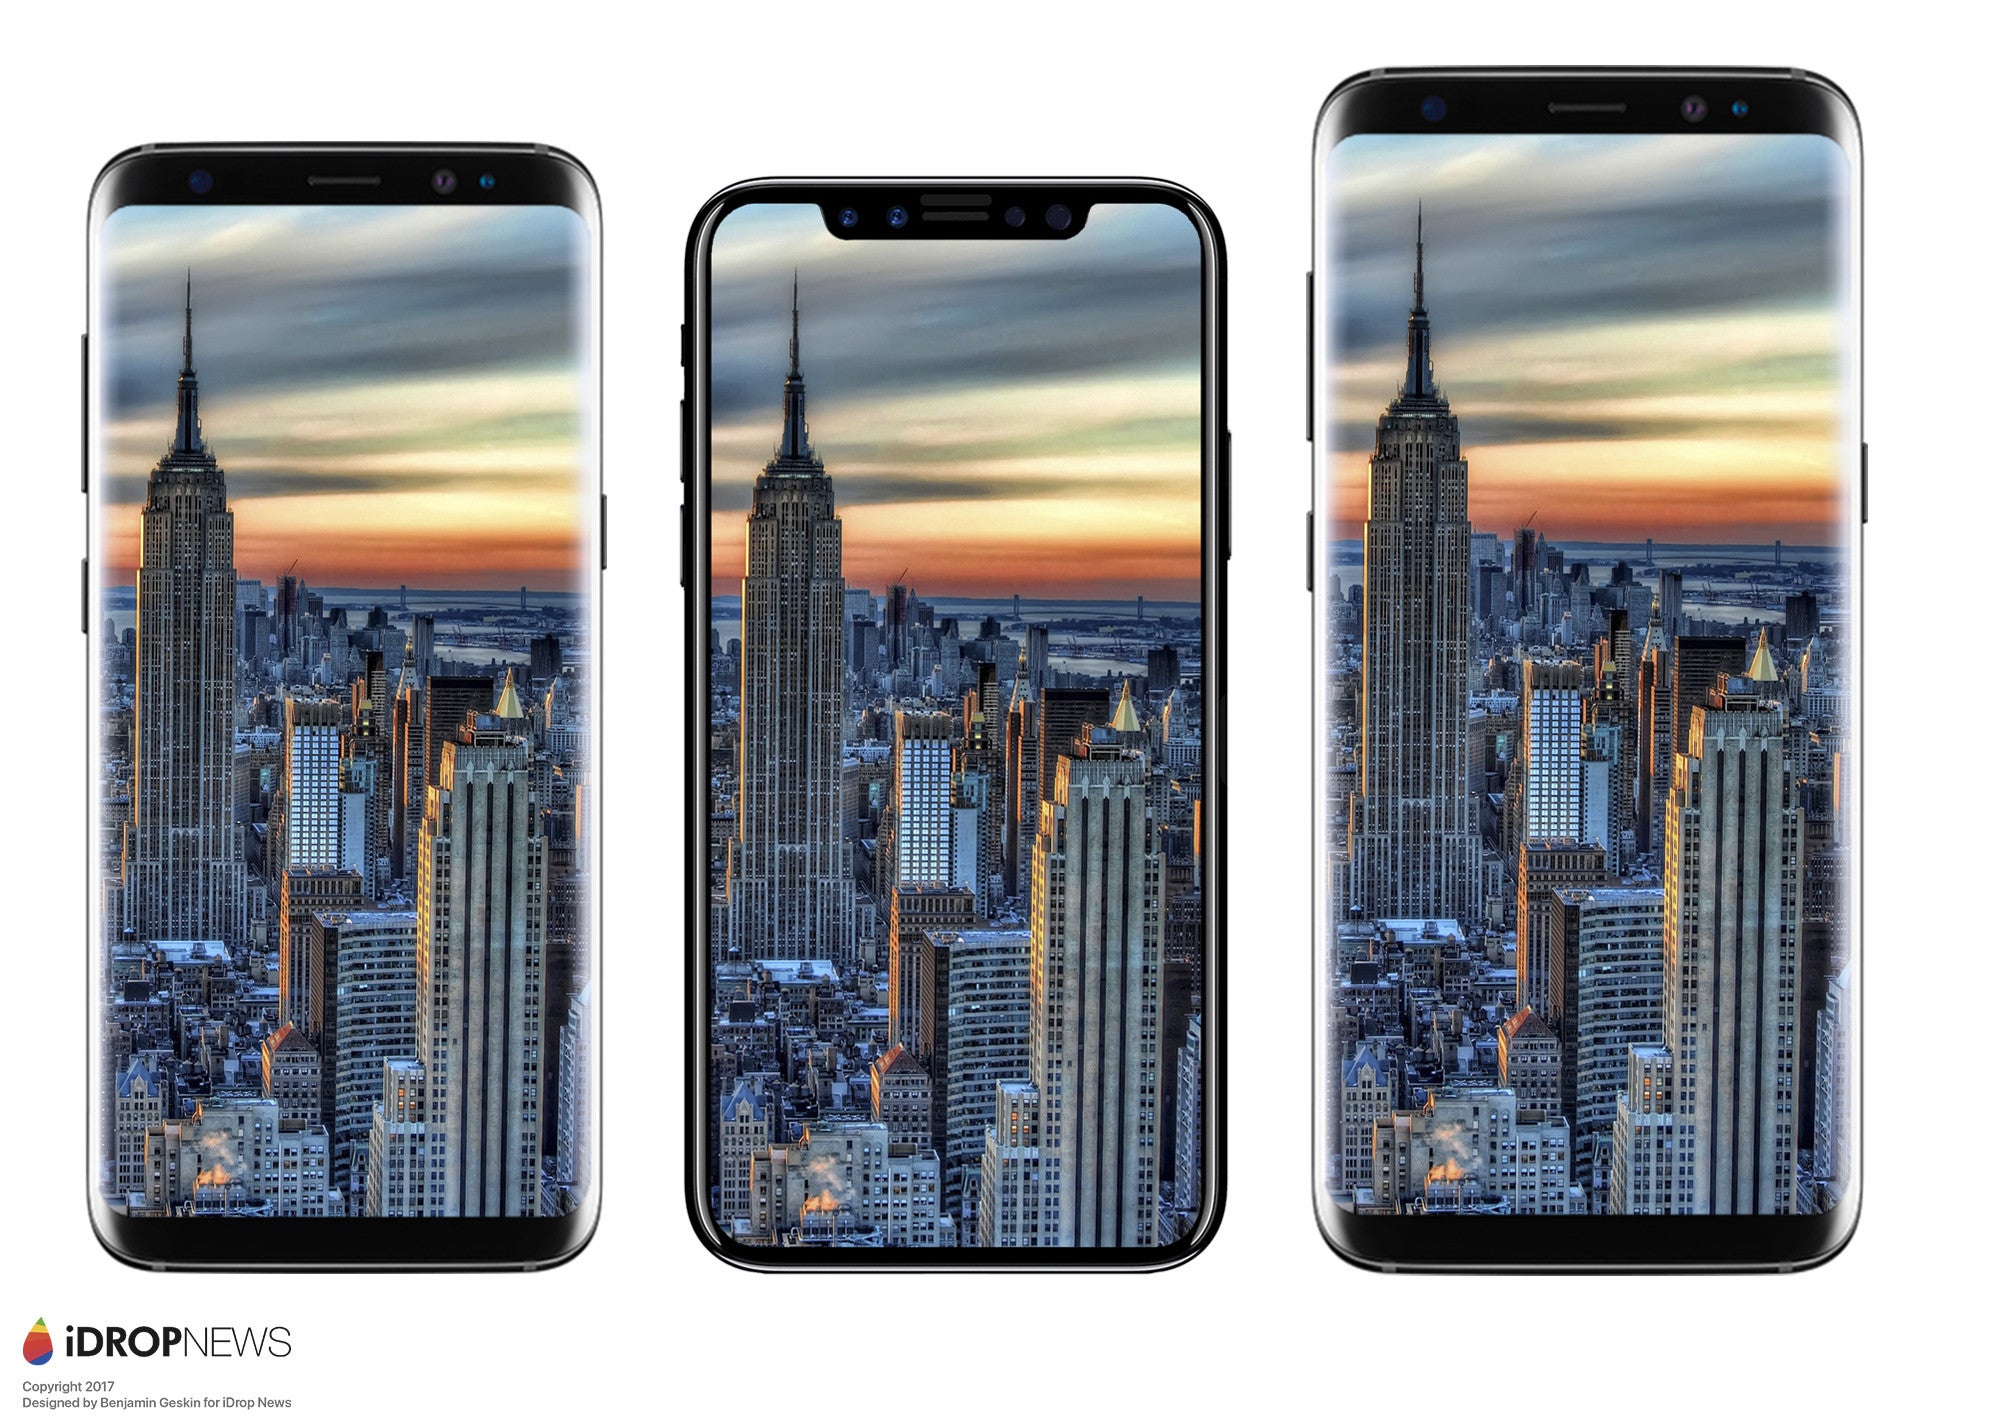 From left to right - Galaxy S8, iPhone 8, Galaxy S8+ - Apple iPhone 7s, 7s Plus, iPhone 8 rumor review: design, specs, features, price, release date